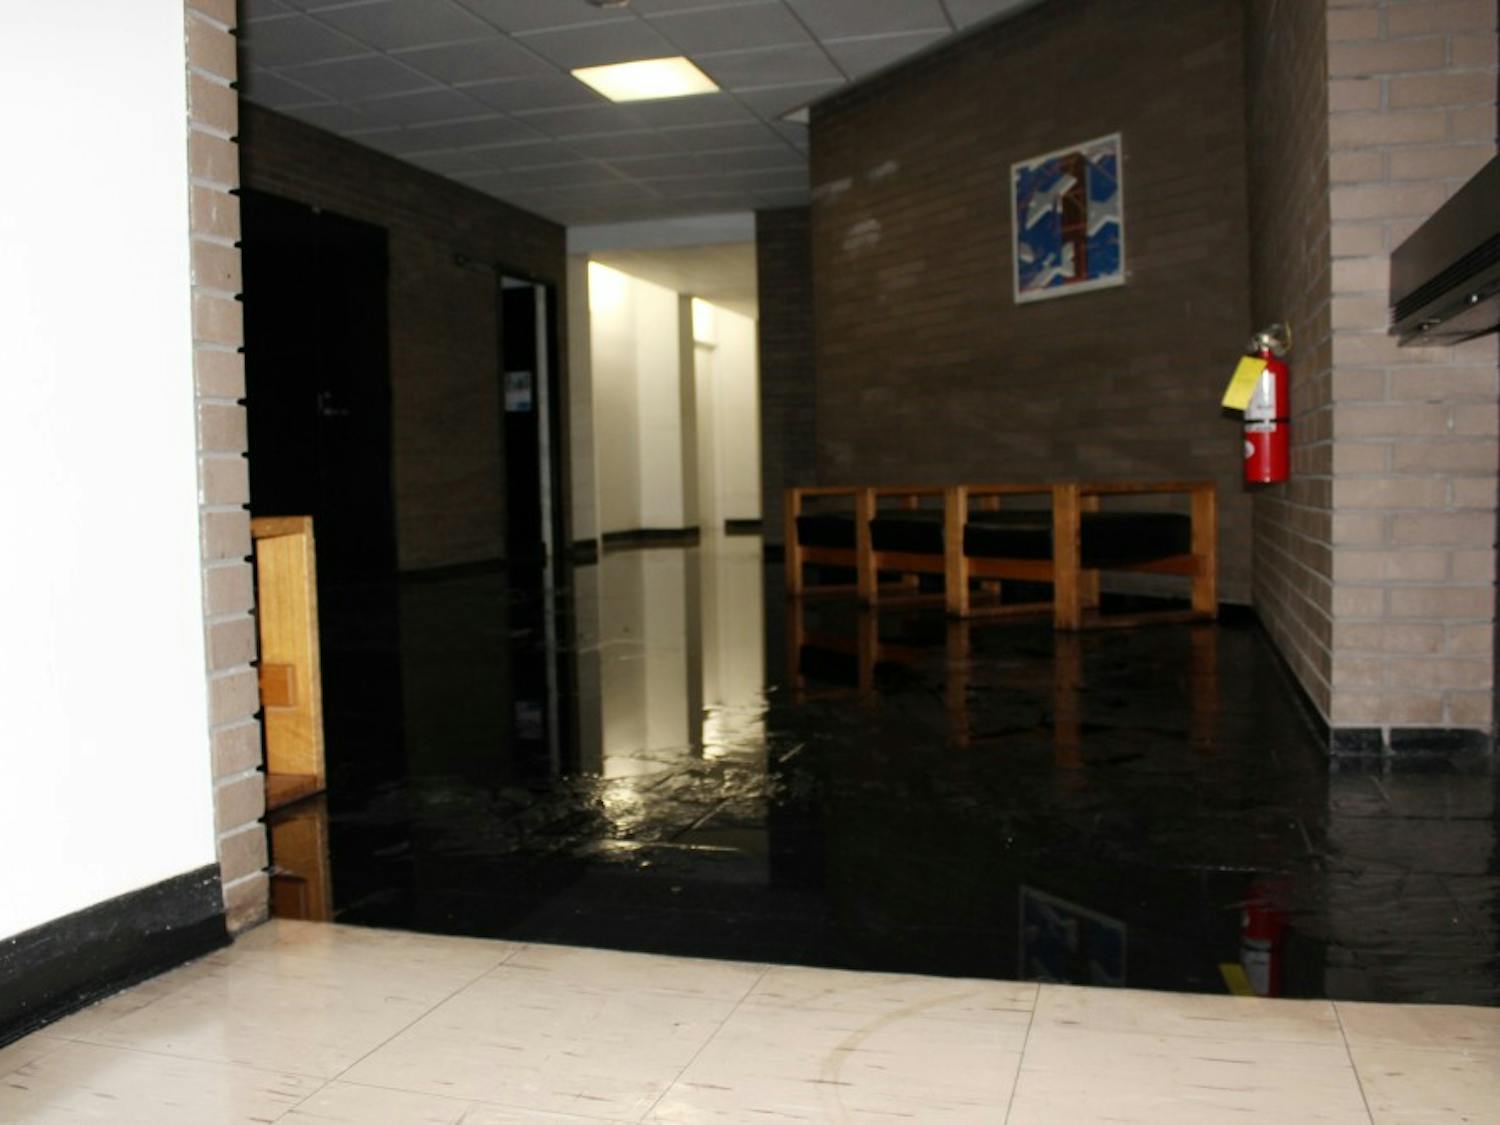 The fourth floor lobby of Clemens hall is flooded as a  result of a burst water valve on the fourth floor cooling system. 